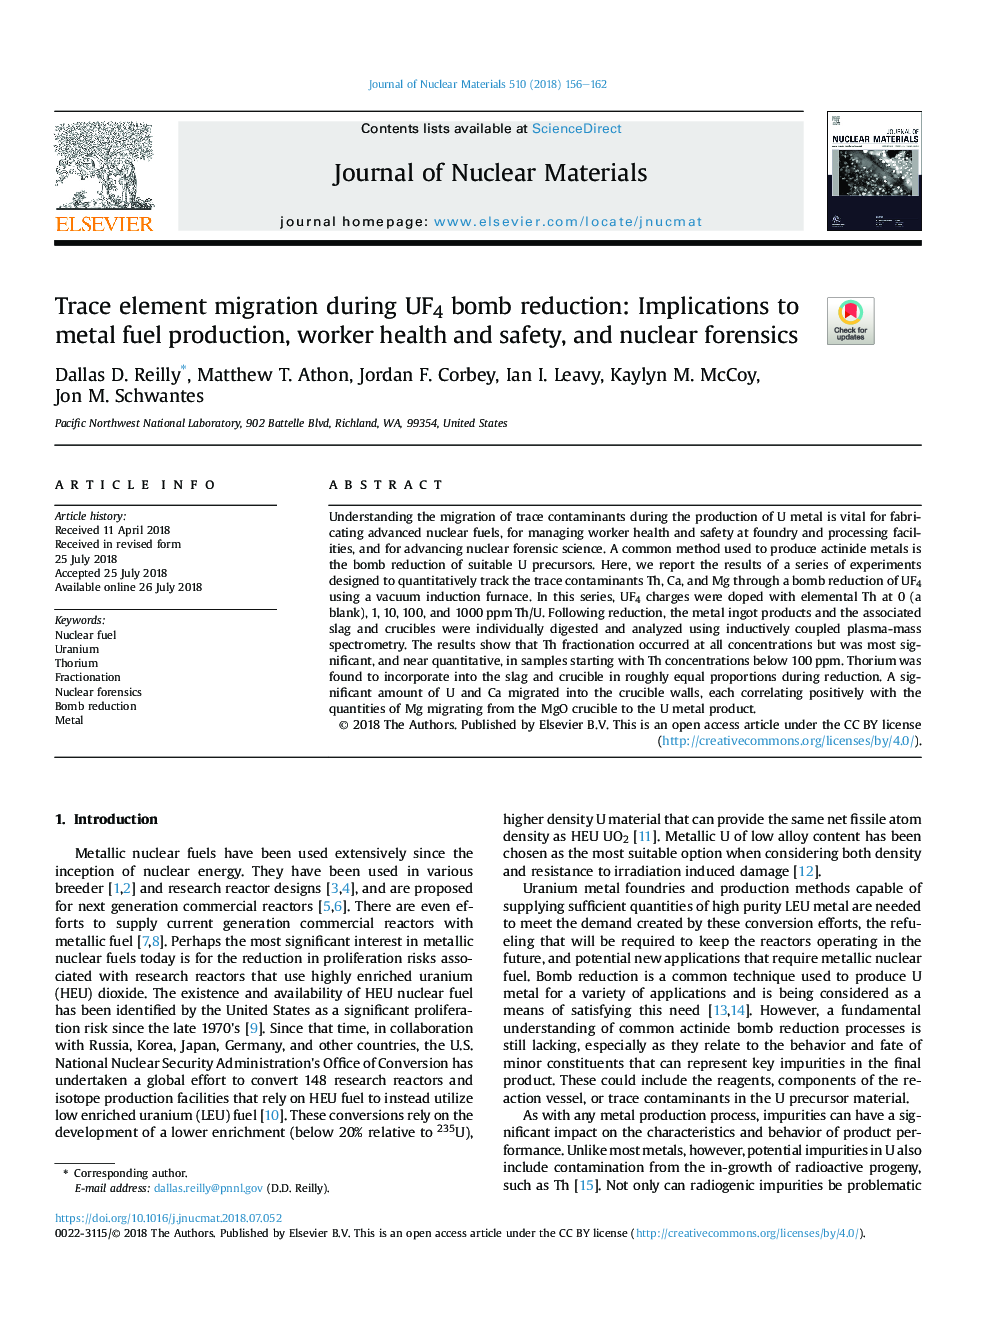 Trace element migration during UF4 bomb reduction: Implications to metal fuel production, worker health and safety, and nuclear forensics